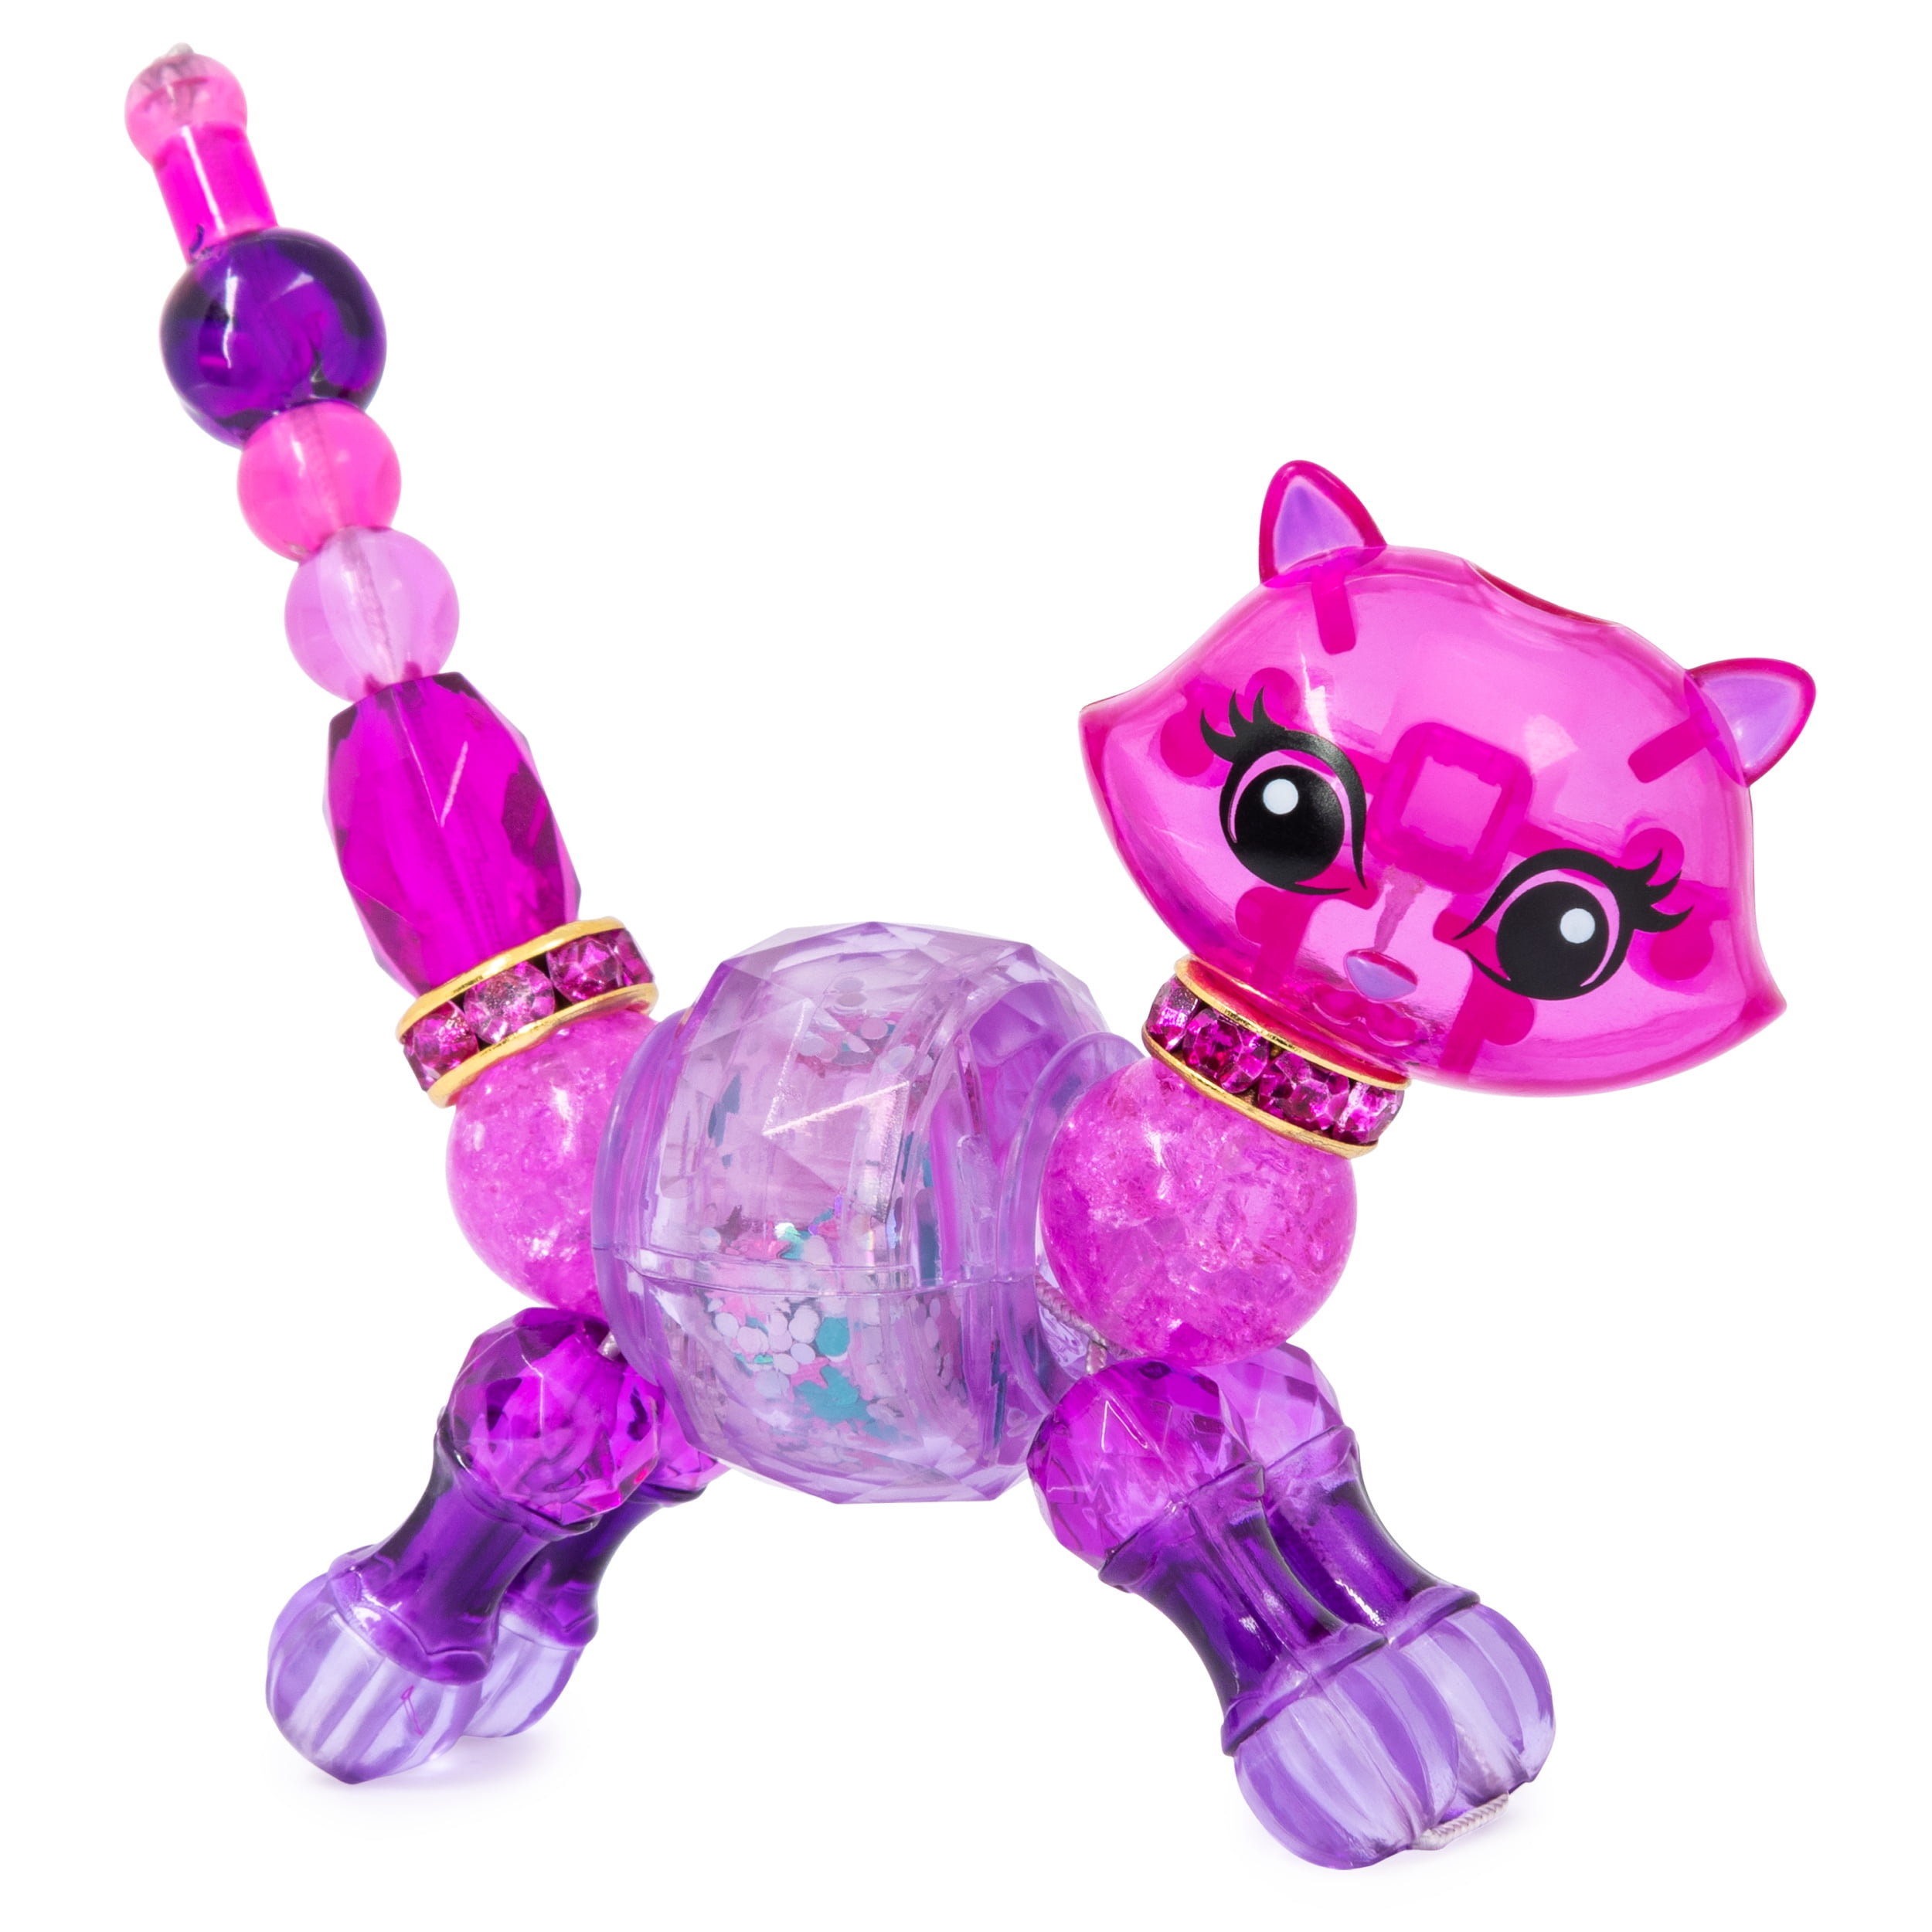 Details about   Twisty Petz Girls Toy Bracelet And Figure Toy Animal Pink Cat Series 3 